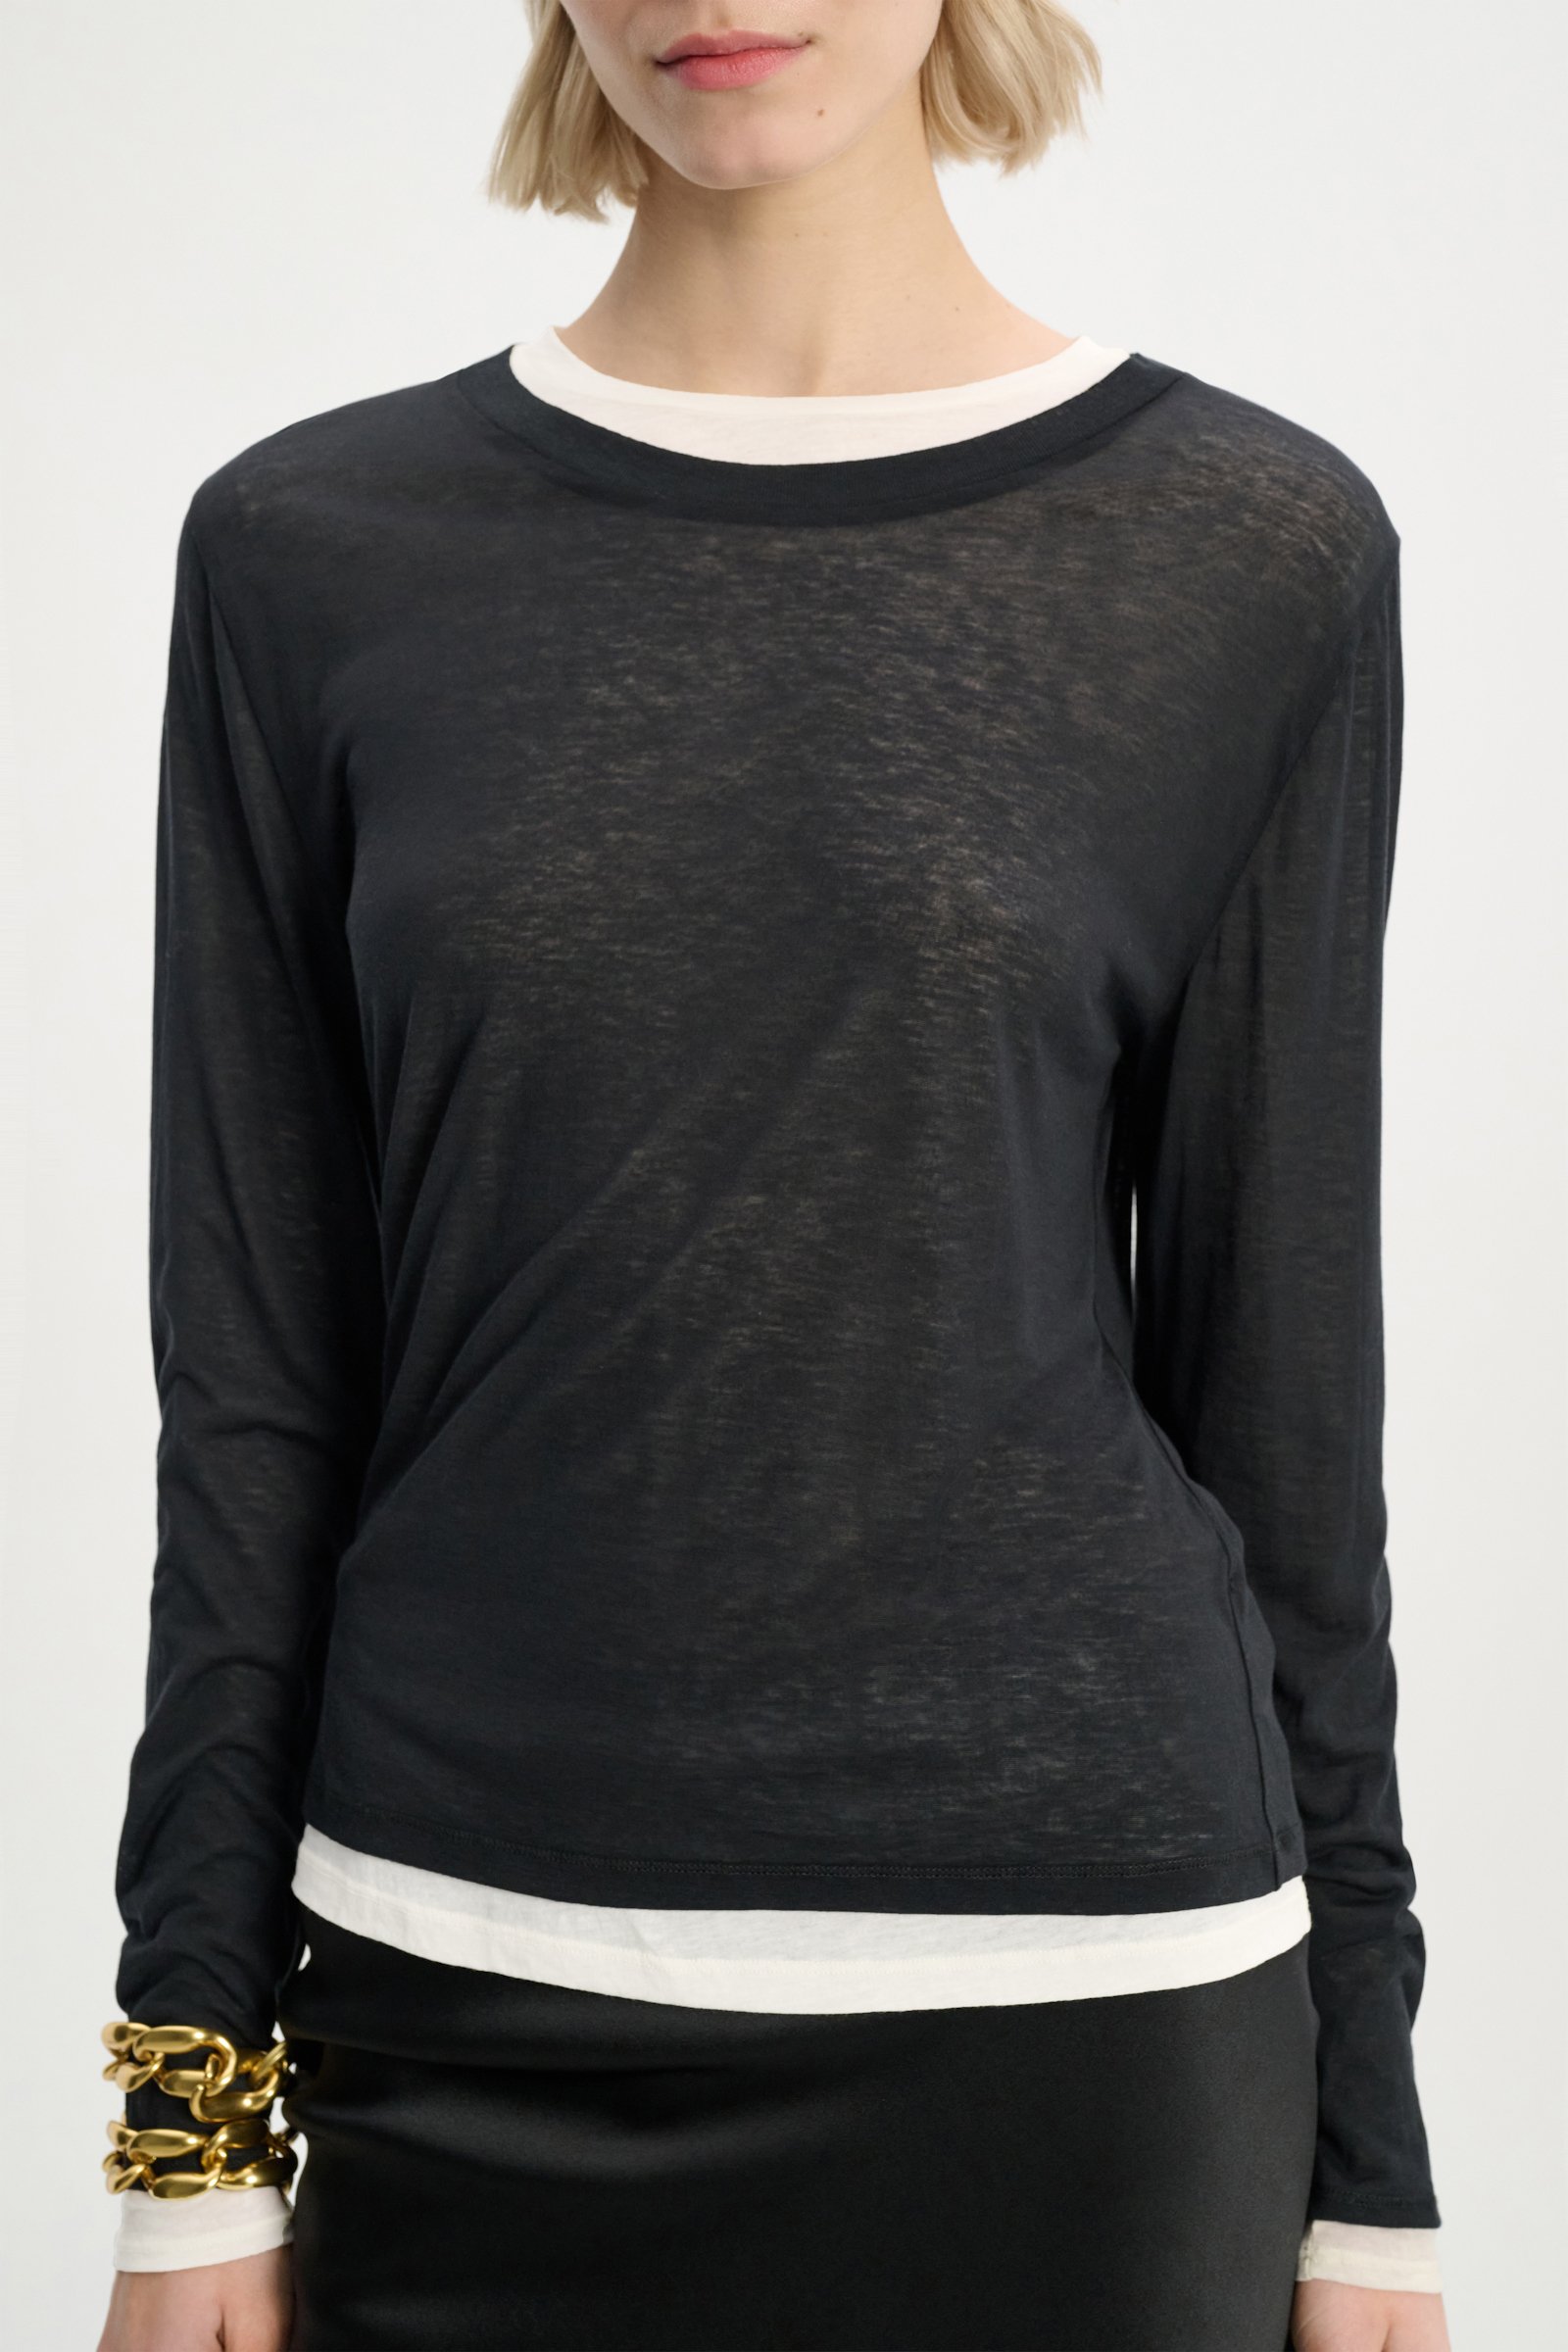 Dorothee Schumacher Double-layer long sleeve top black and white